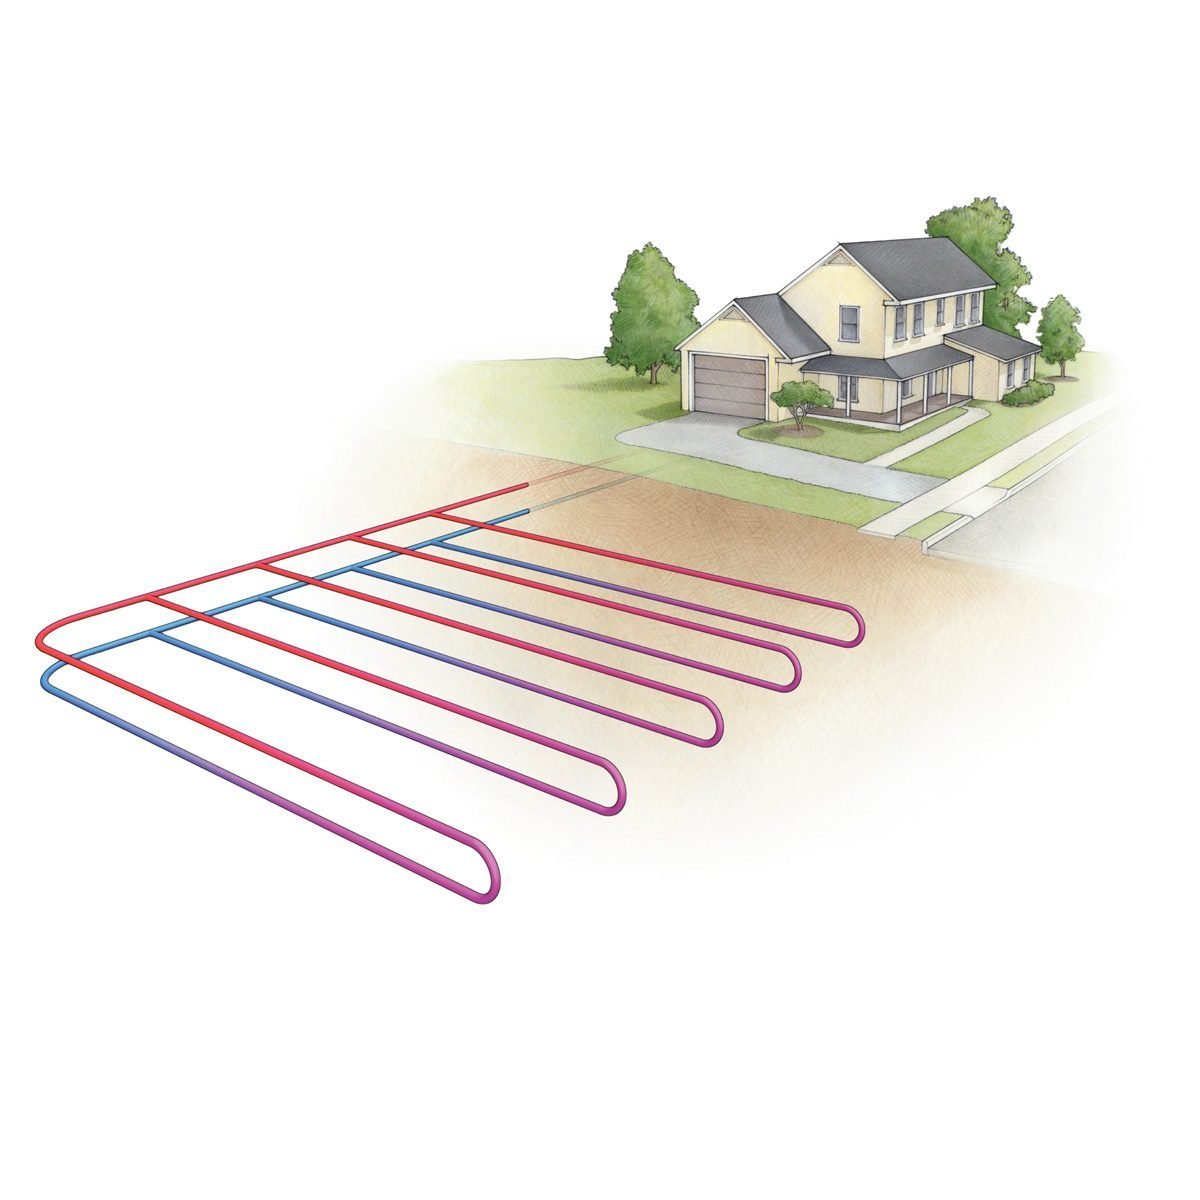 The Pros and Cons of Geothermal Heat Pumps